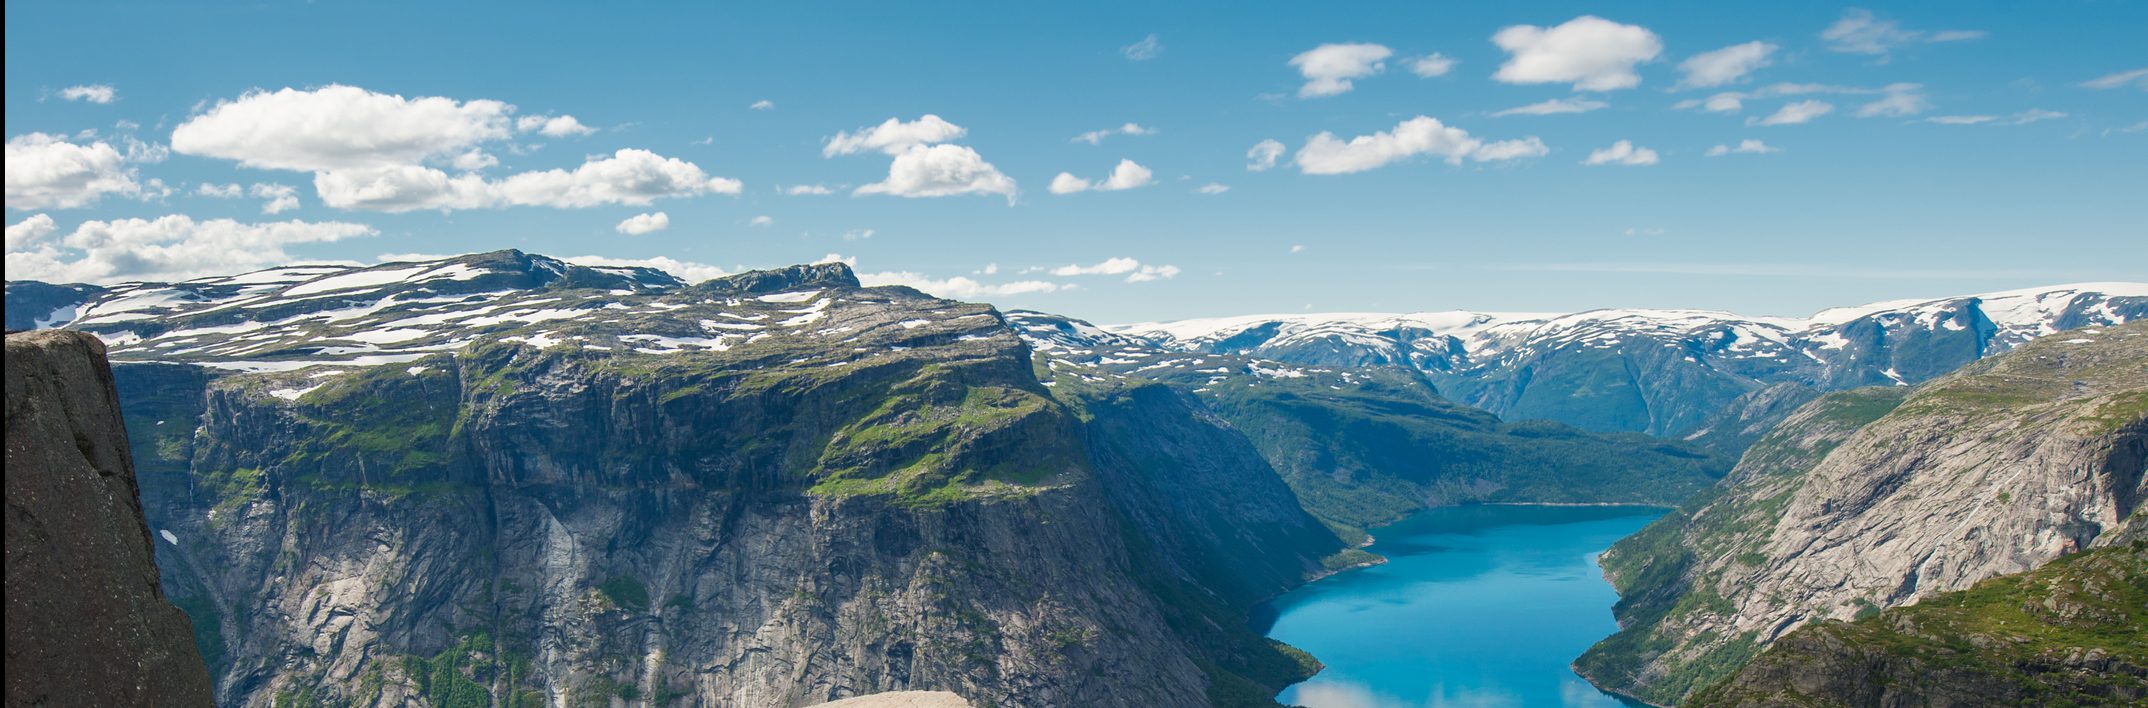 Flights to Norway in the $400s round-trip!